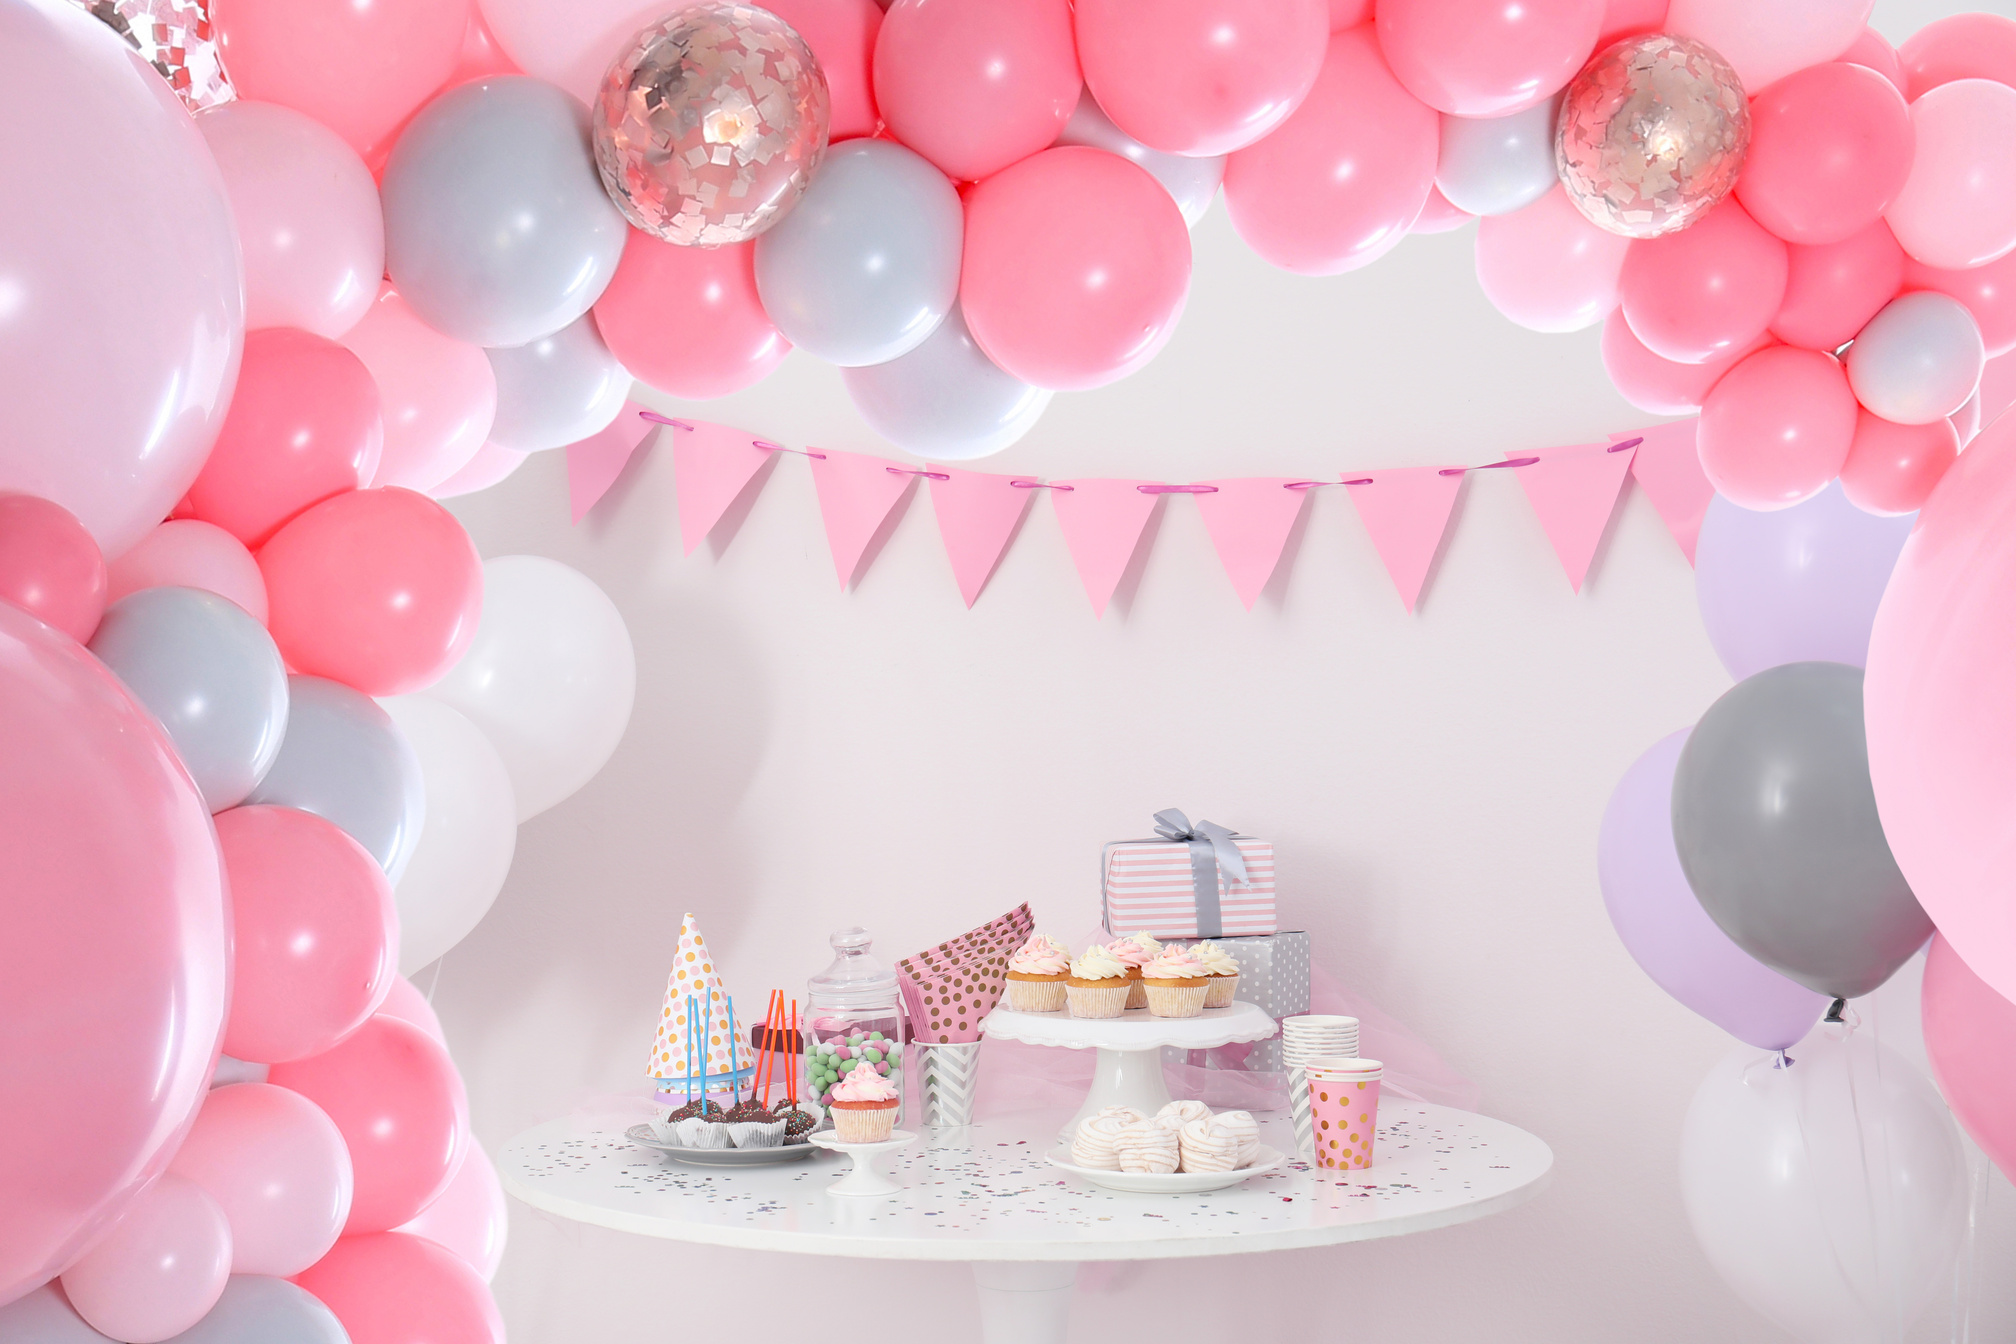 Party Treats and Items on Table in Room Decorated with Balloons